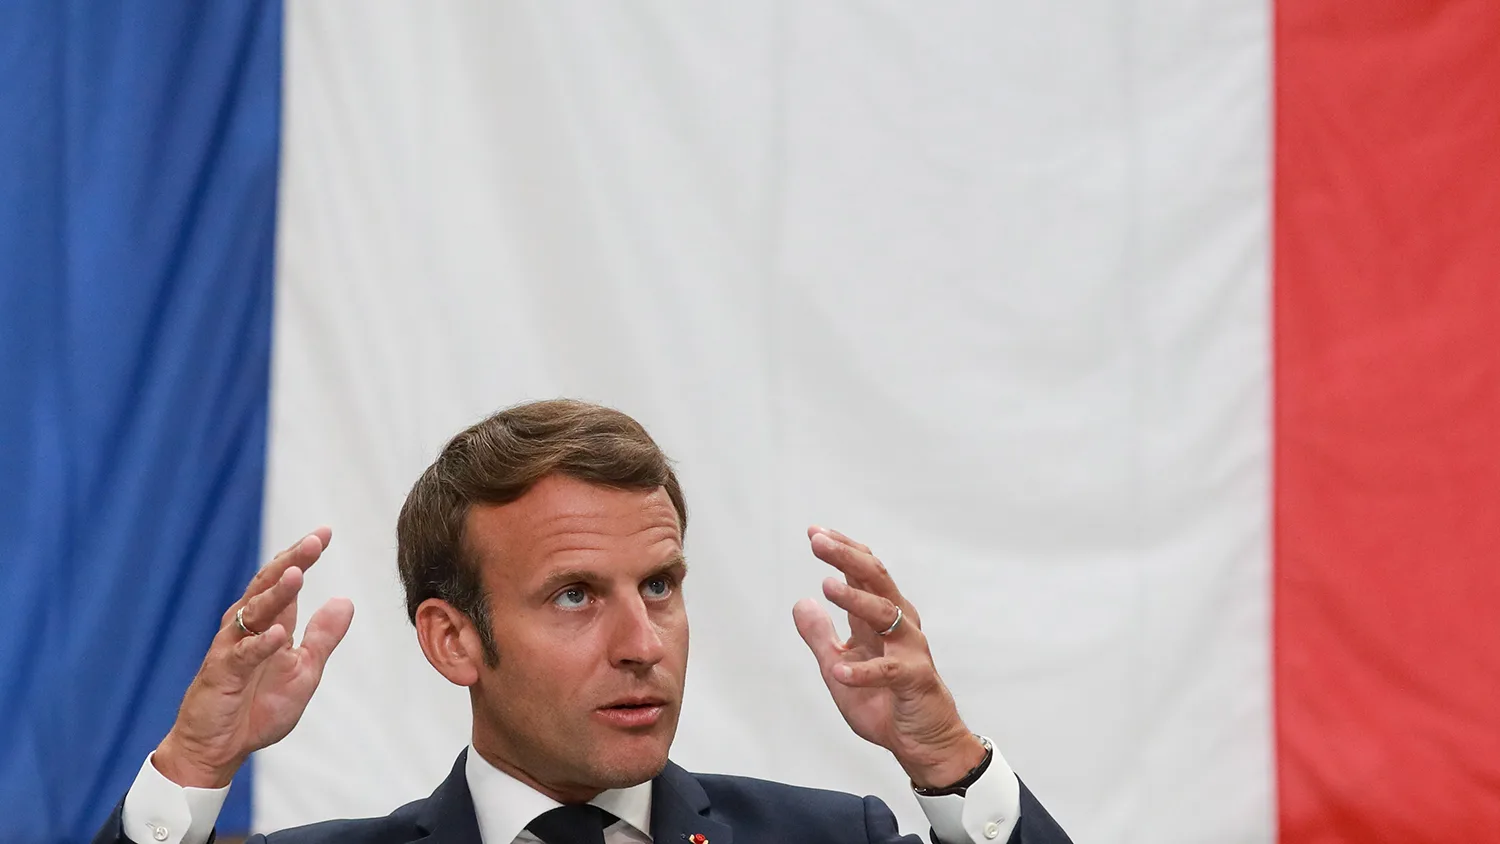 macron-france-philosopher-ricouer-GettyImages-1215229210-lead